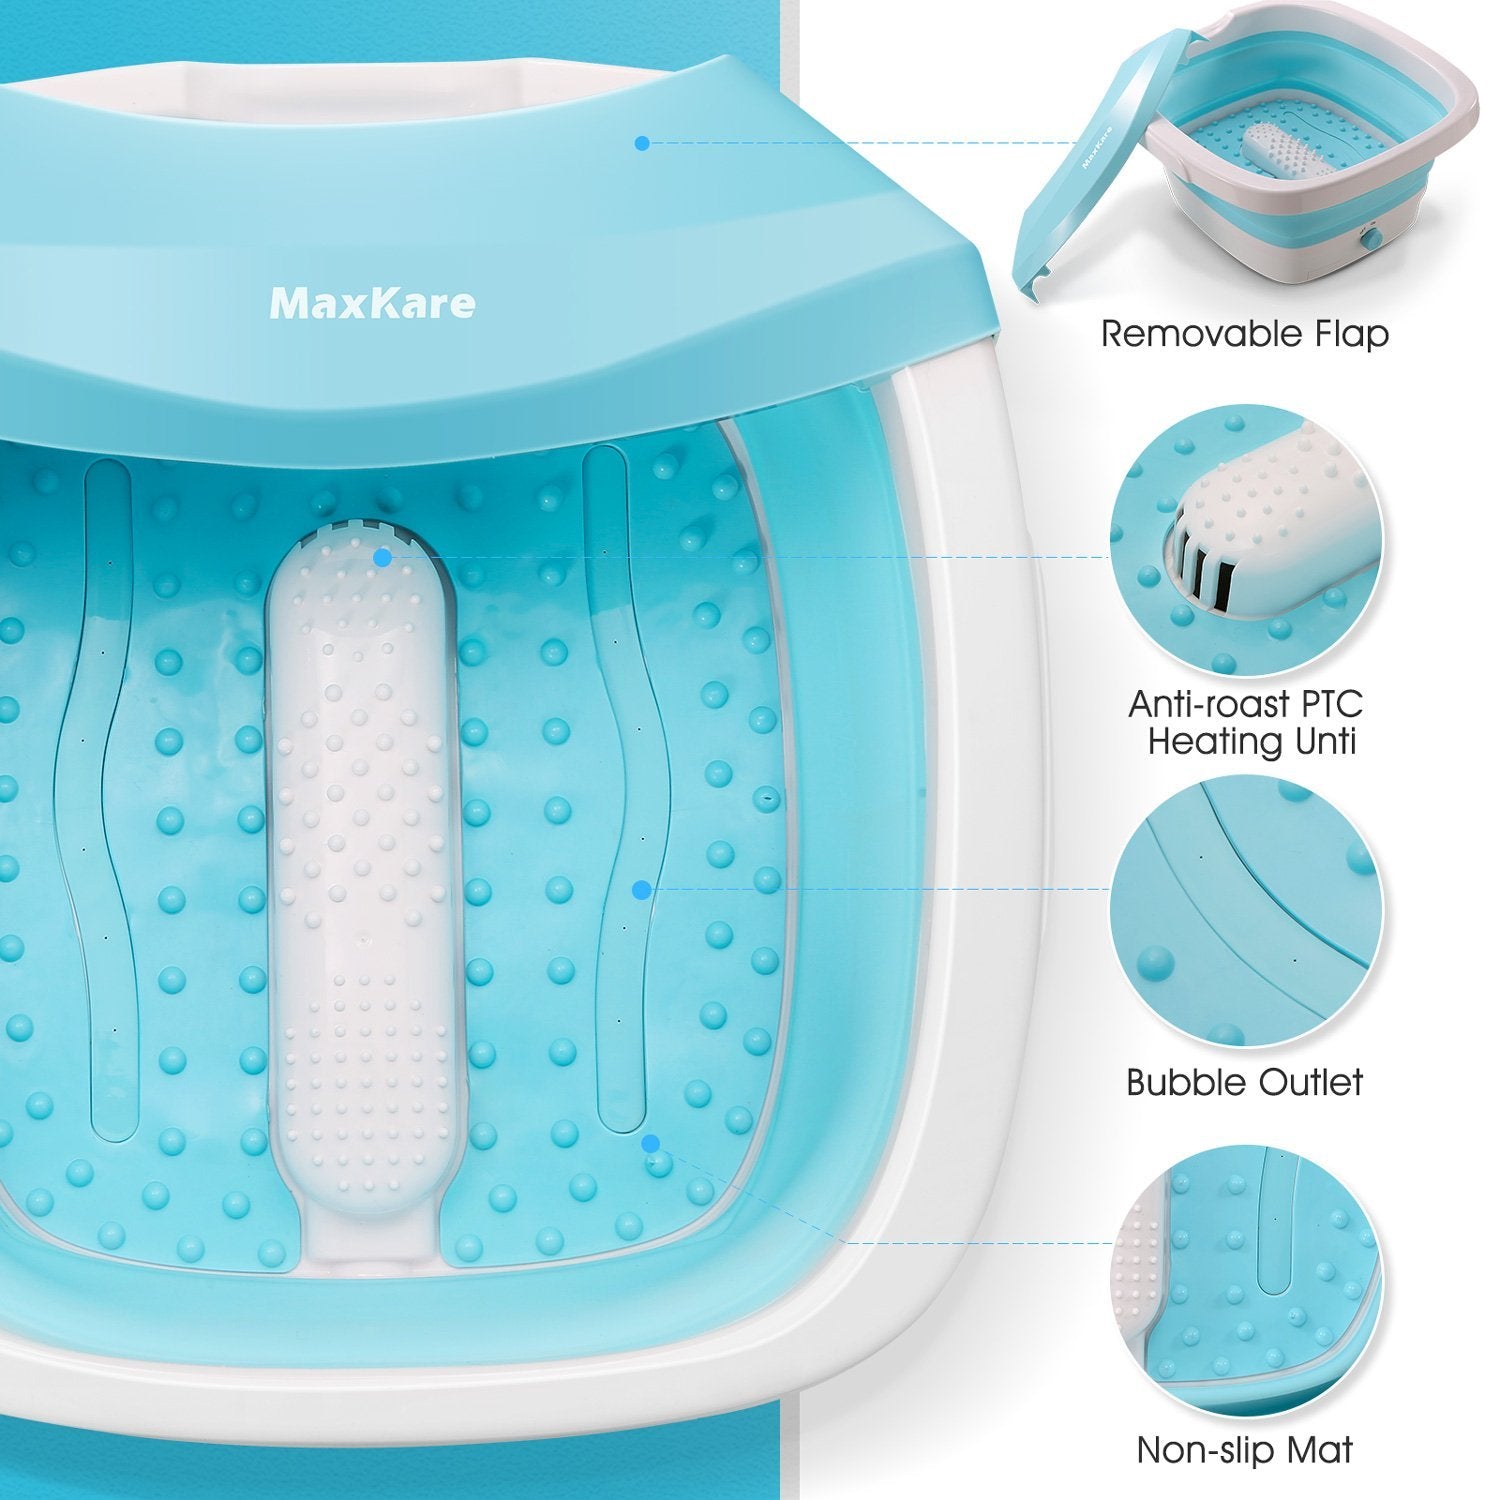 Load image into Gallery viewer, Foot Spa Bath Massager with Collapsible Design, Fast Heating with Bubbles Massage Function, Easy Storage, Foldable Foot Soaking Tub for Feet - NAIPO
